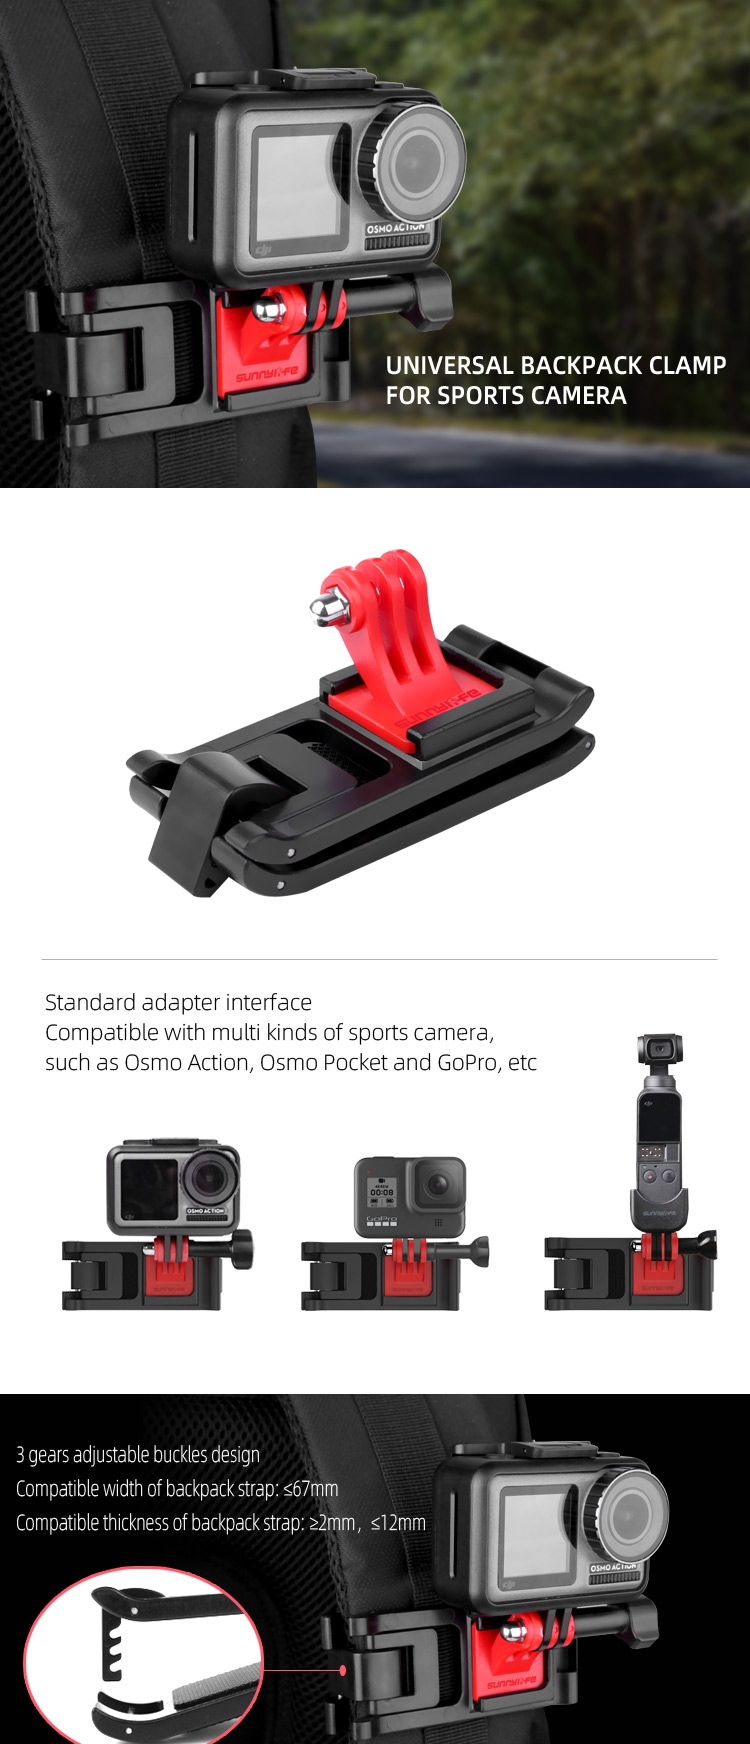 Sunnylife Universal Sports Camera Backpack Clamp Adjustable Clips for GoPro 8 / DJI Osmo Action / Osmo Pocket